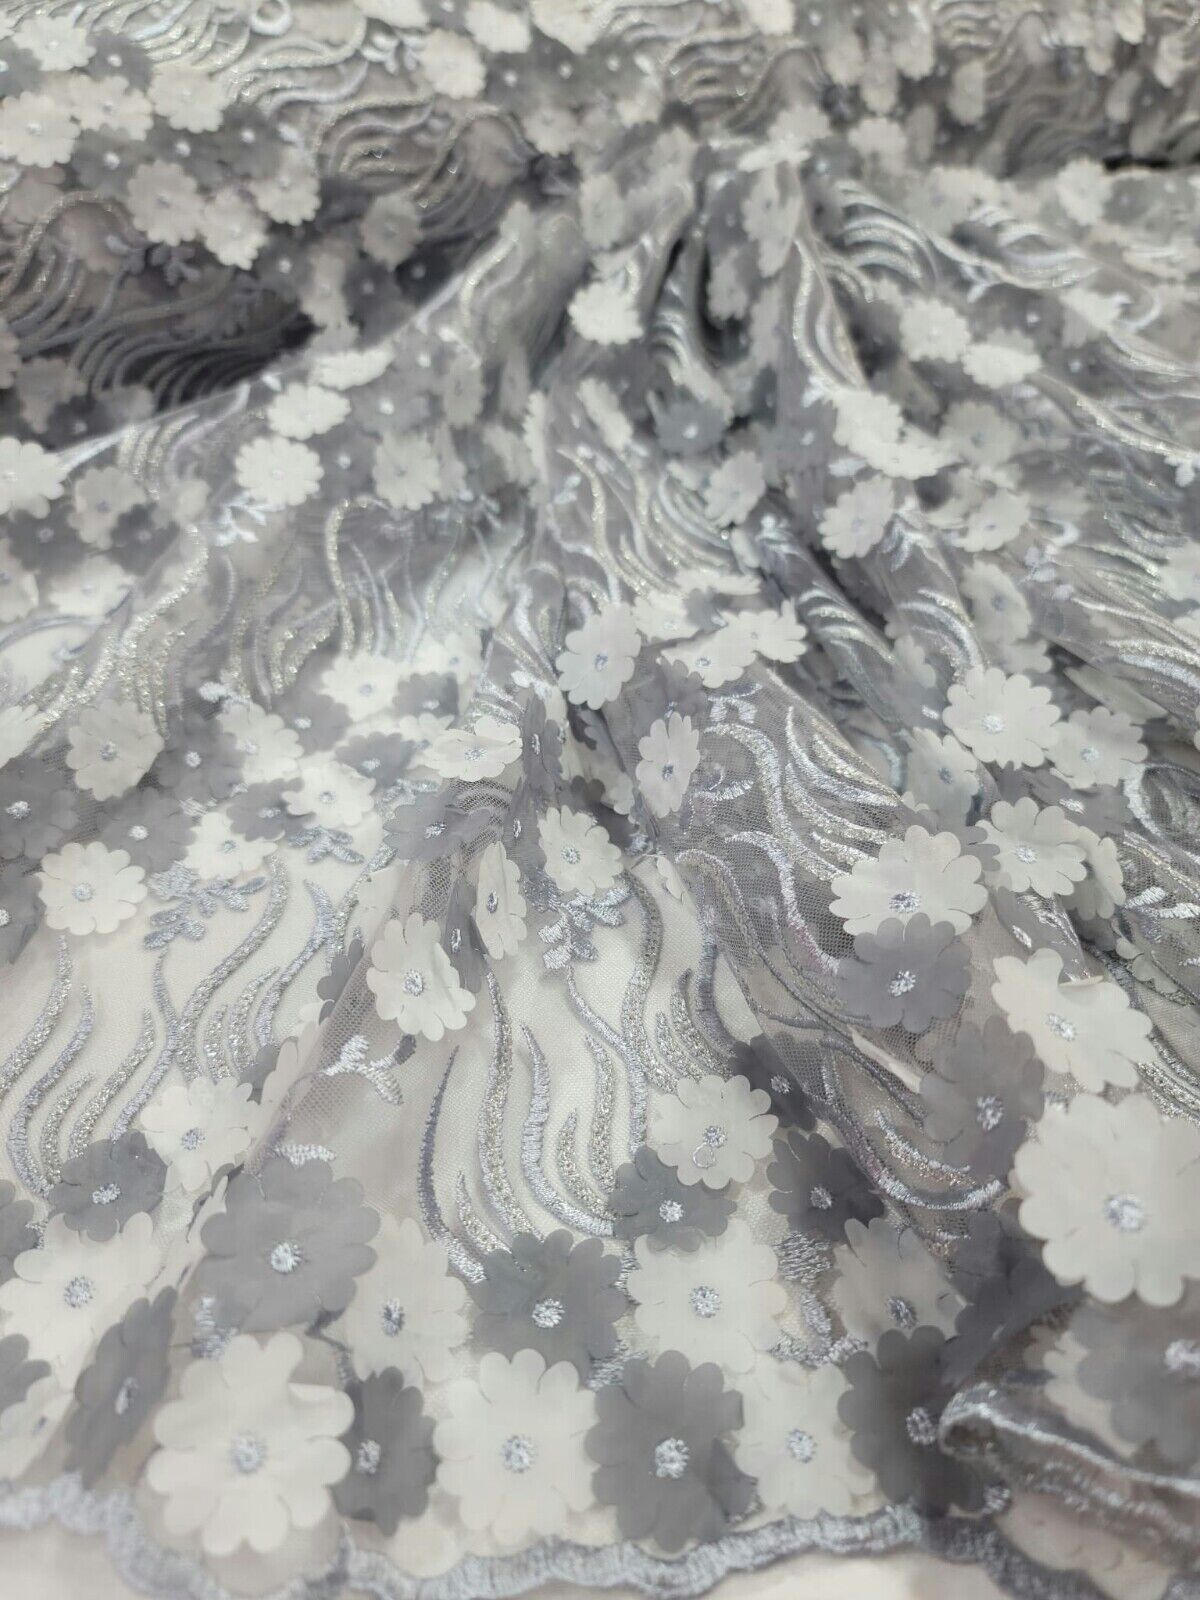 3D Floral Flowers Lace Gray  Embroidery Sequin Fabric - Sold by the Yard